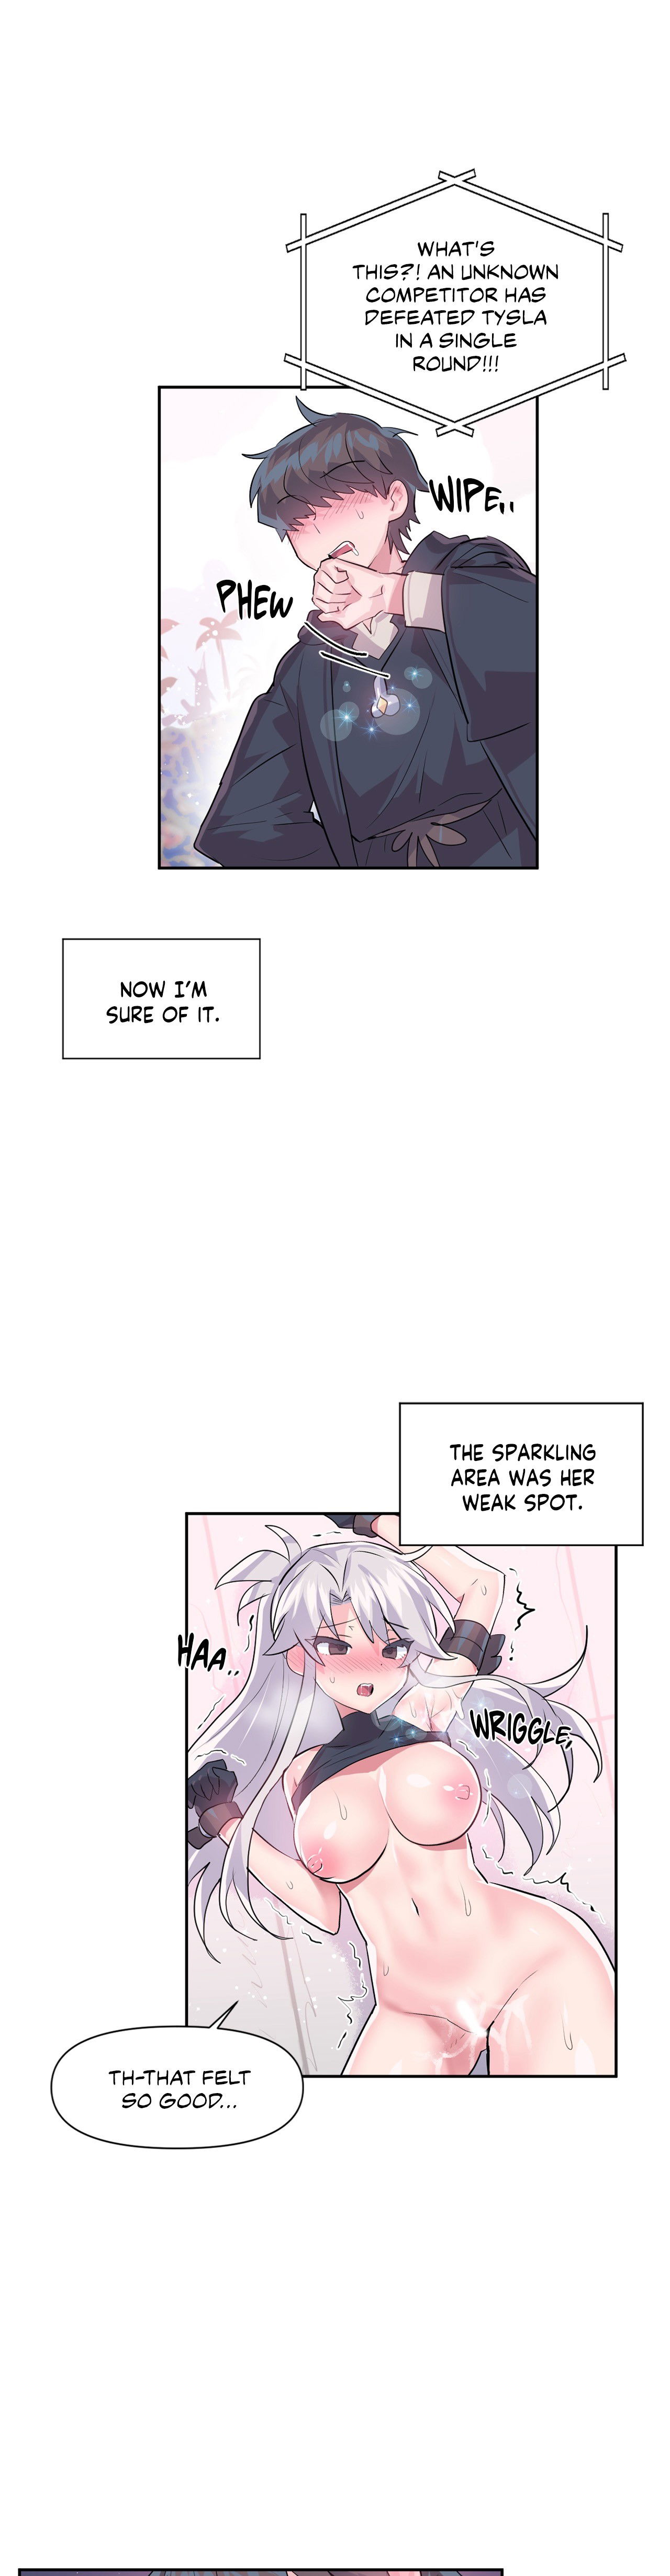 log-in-to-lust-a-land-chap-30-18